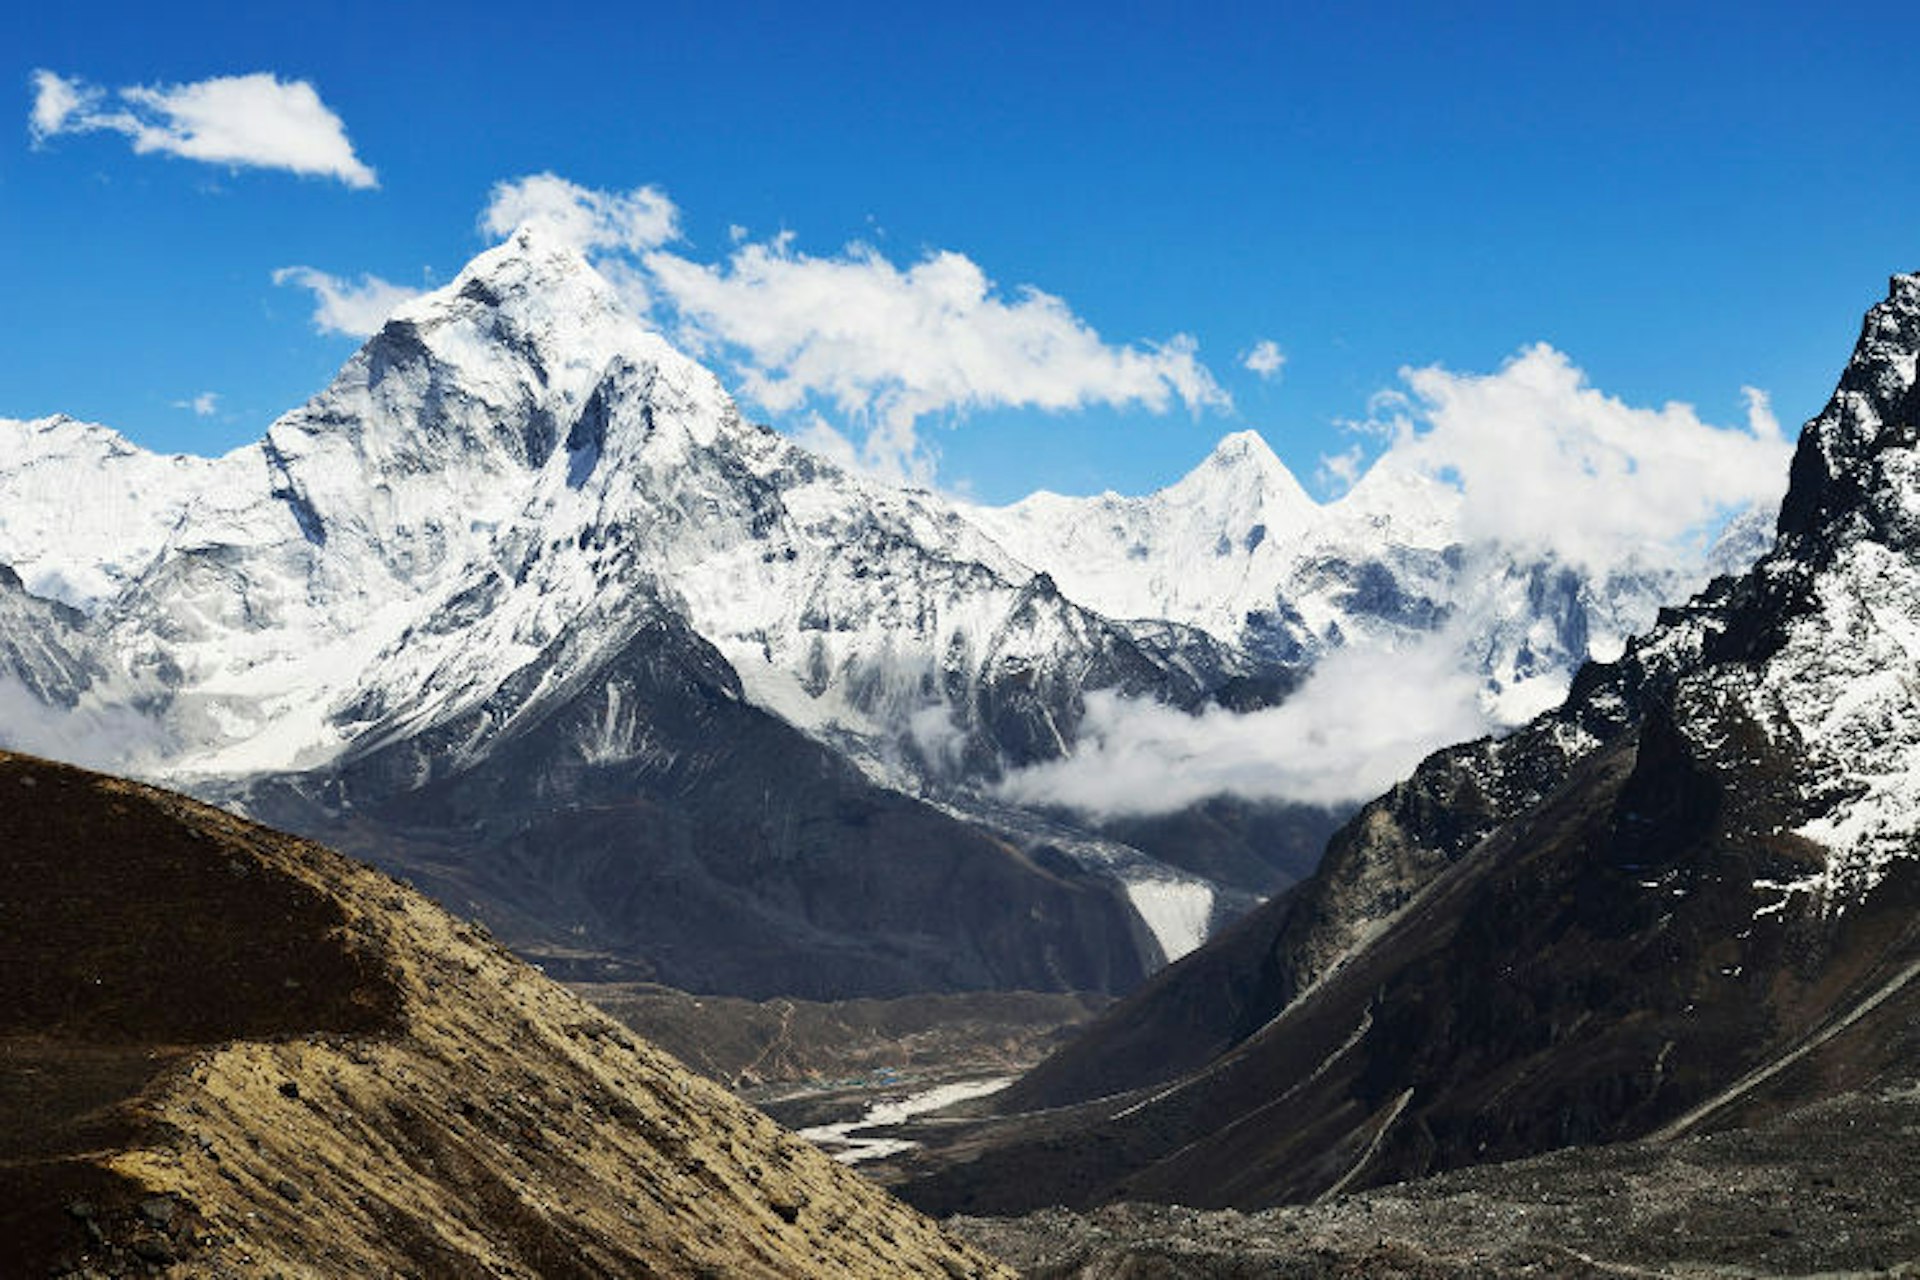 View towards Ama Dablam from the trail to Cho La. Image by Jochen Schlenker / Getty Images.